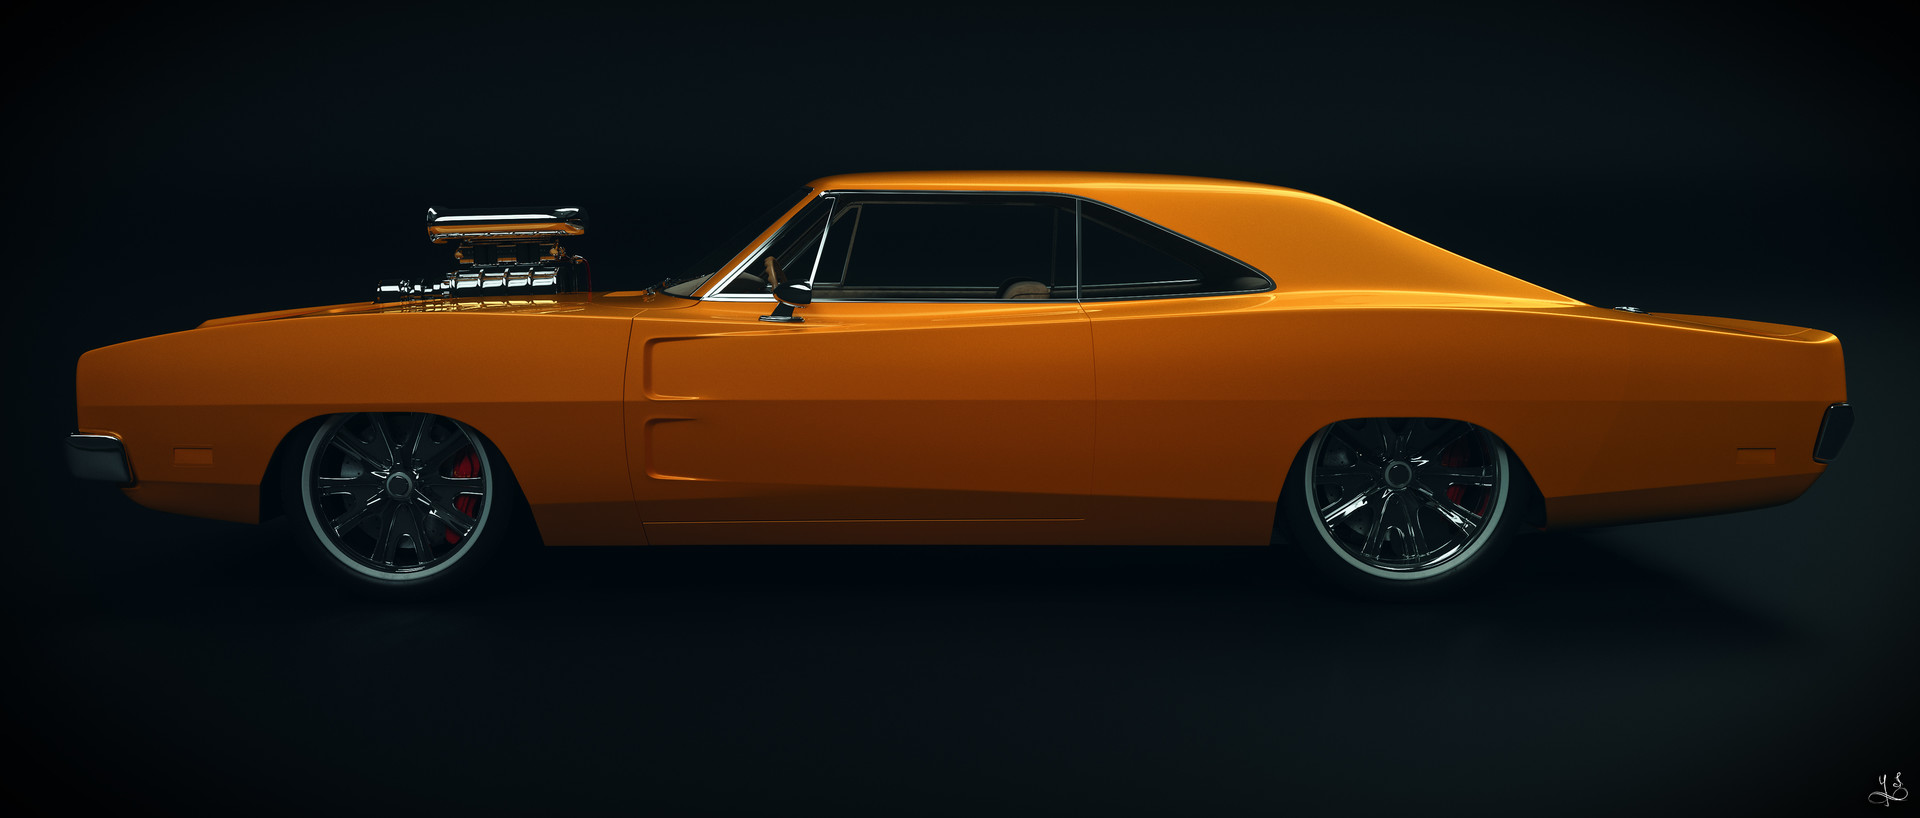 ArtStation - Gift to my father: Dodge Charger 1970 Custom Build